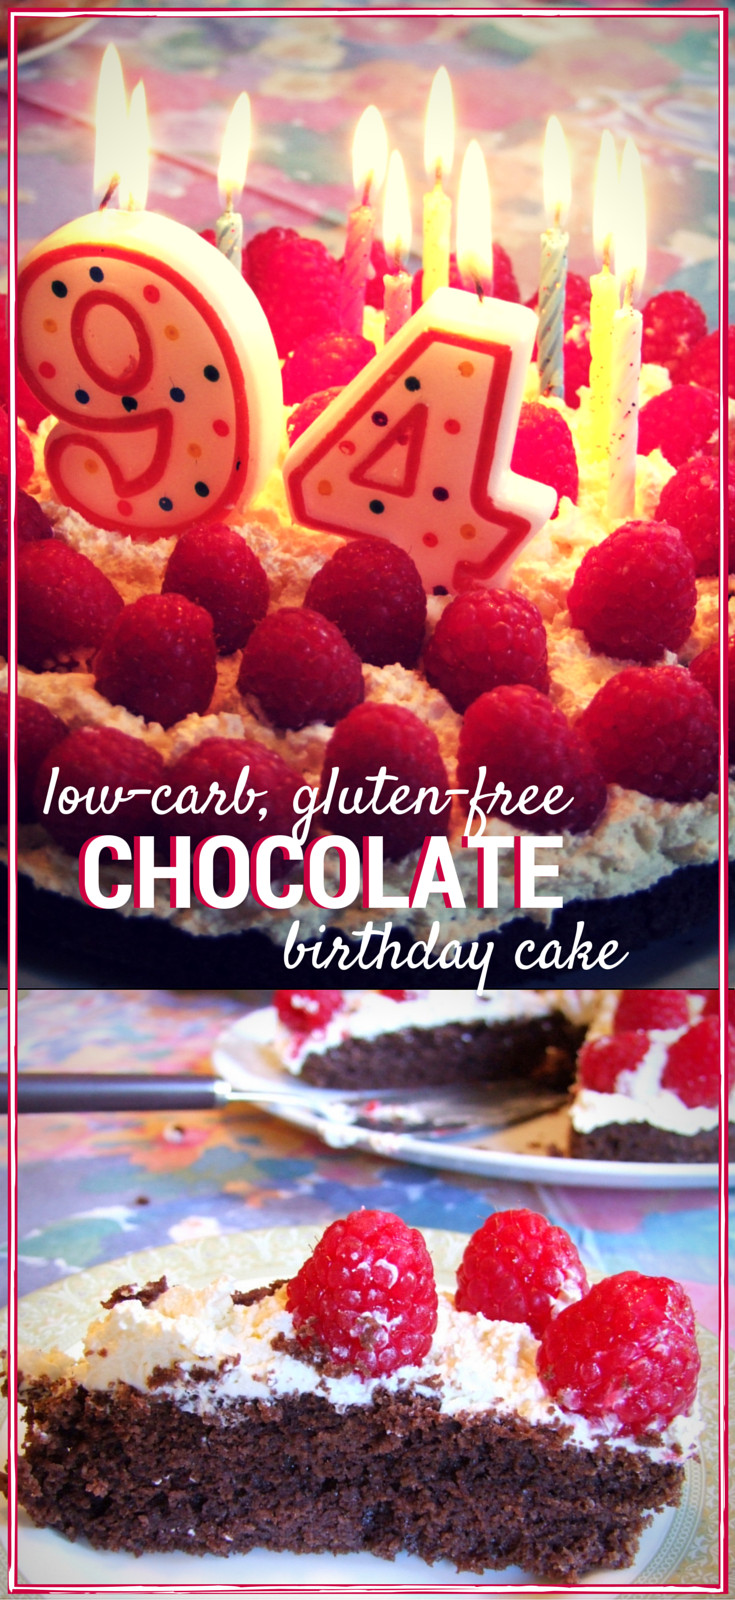 Gluten Free Birthday Cake Delivery
 Super low carb & gluten free diabetic chocolate cake